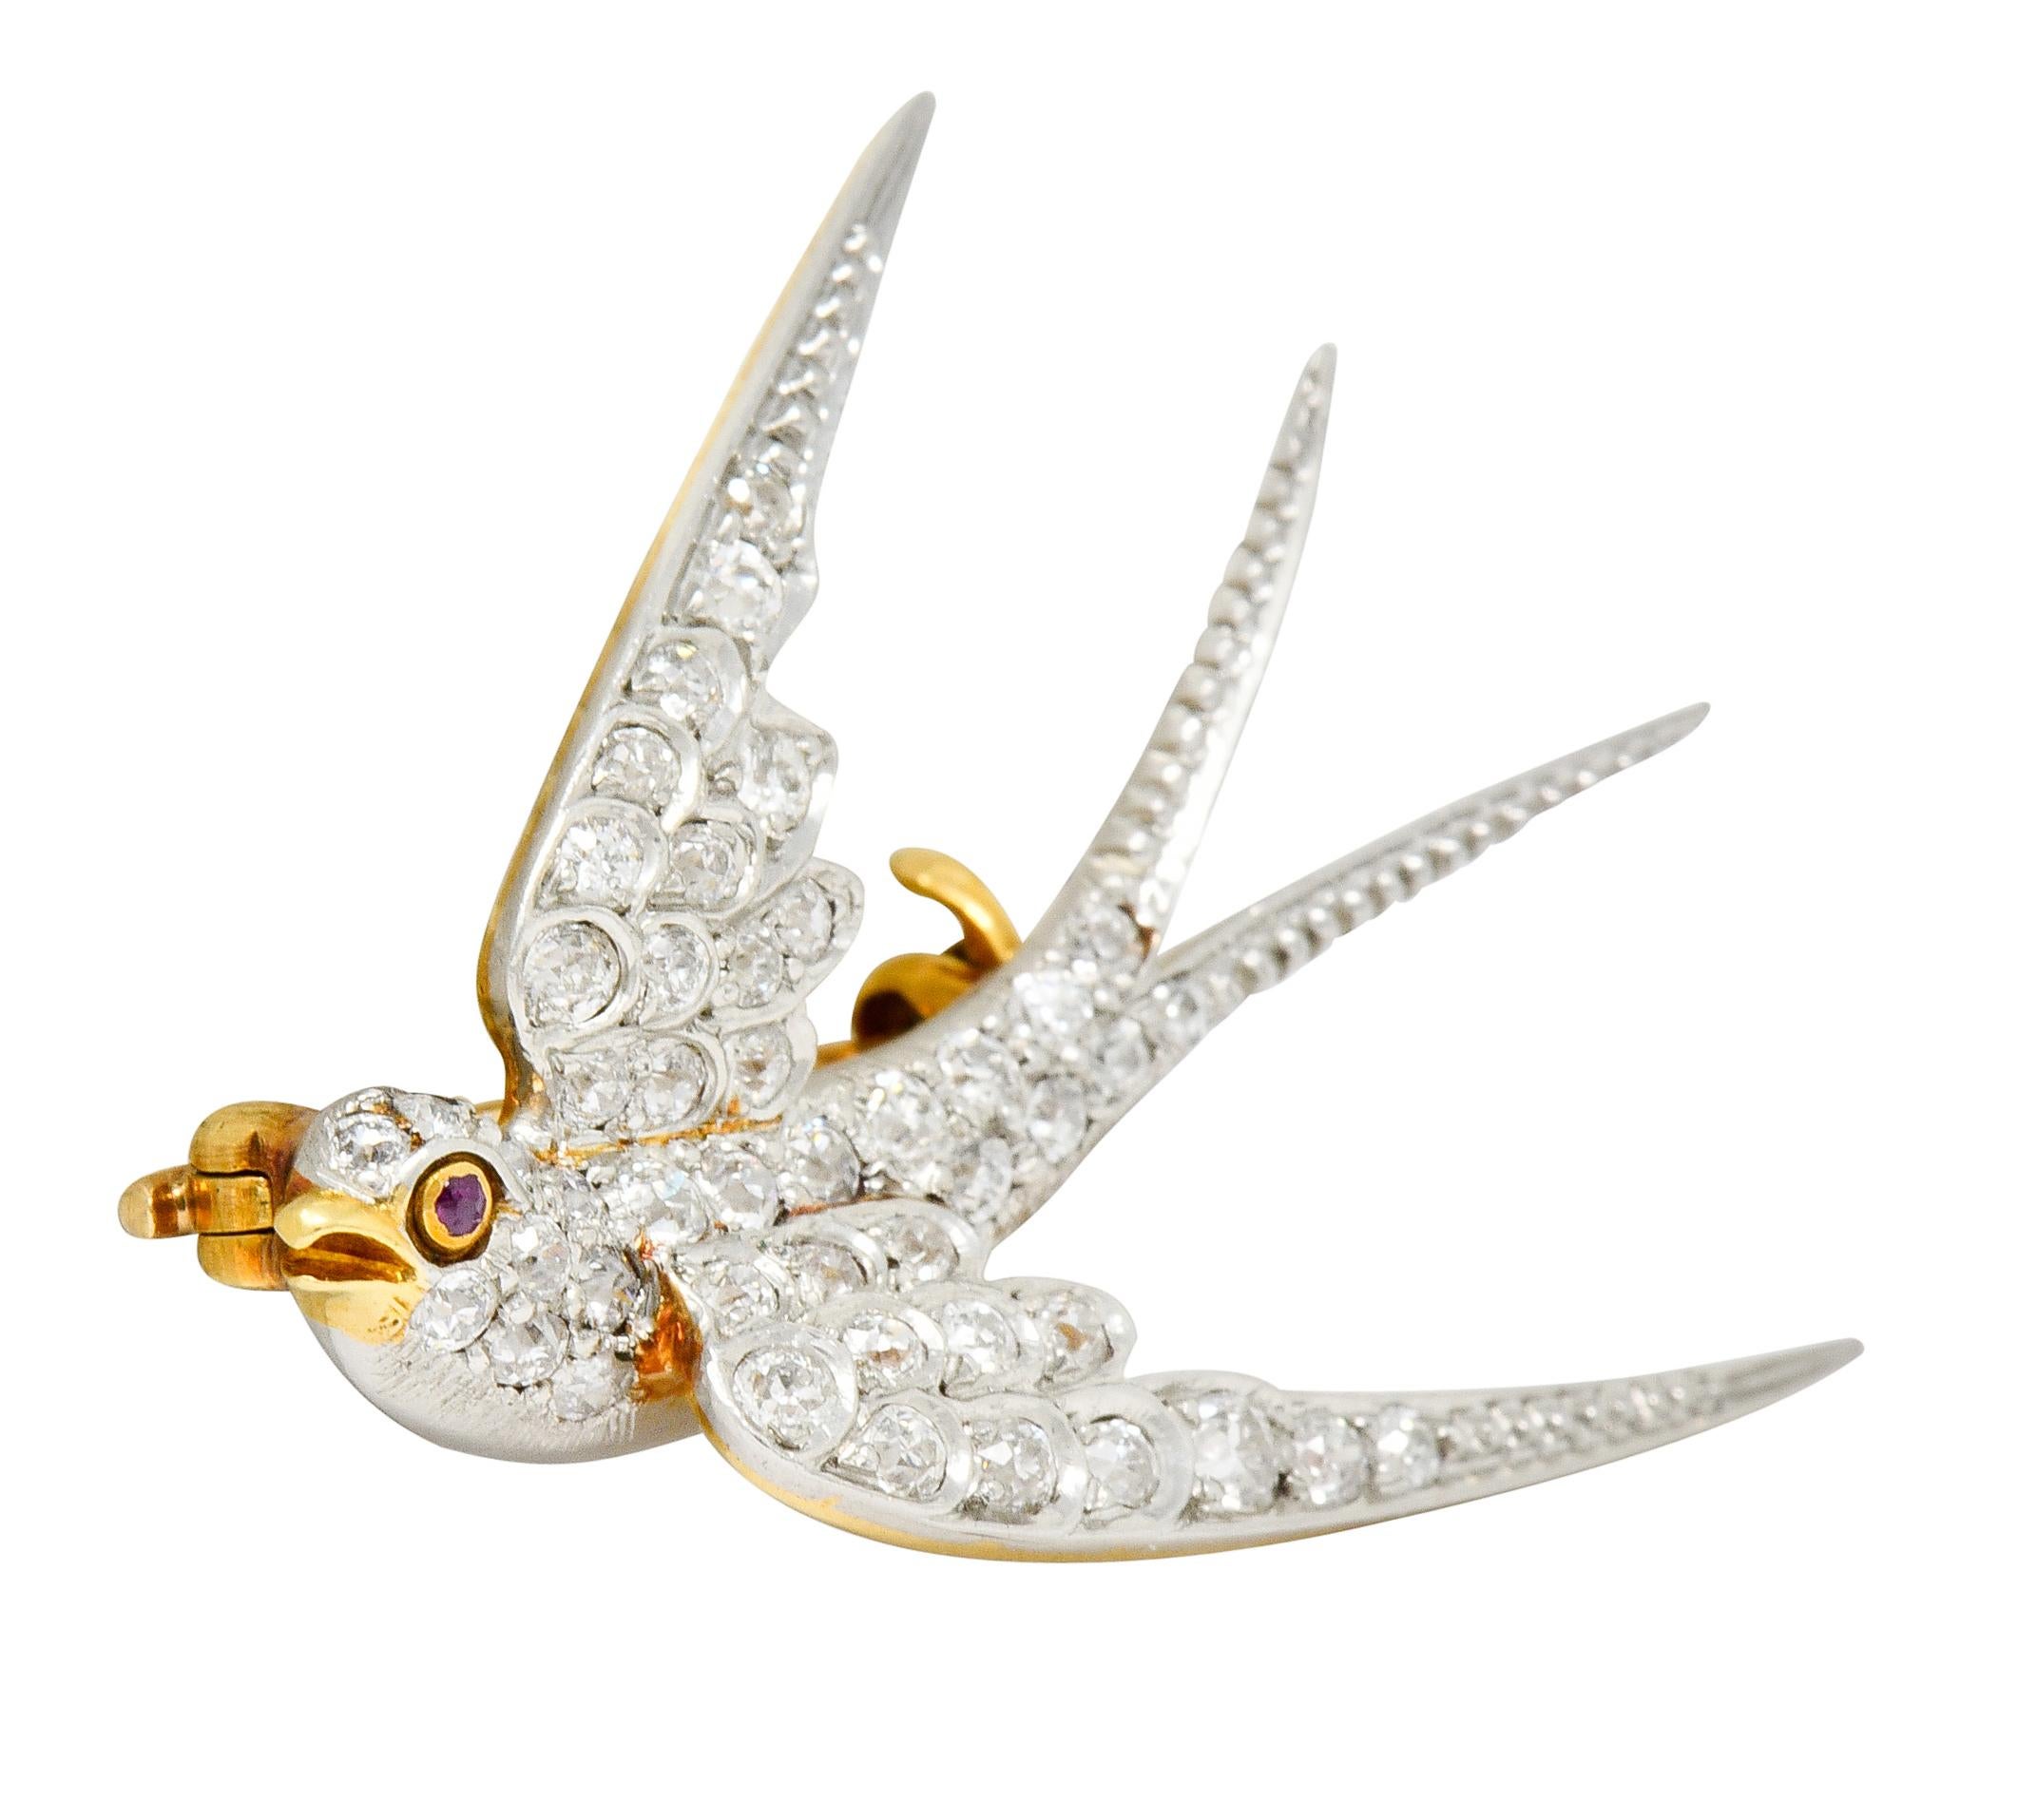 Depicting a stylized swallow in flight with delicately engraved tail and stylized scallop motif feathers

Set throughout by old European cut diamonds weighing in total approximately 1.06 carats, G to I color with SI clarity

Accented by a polished